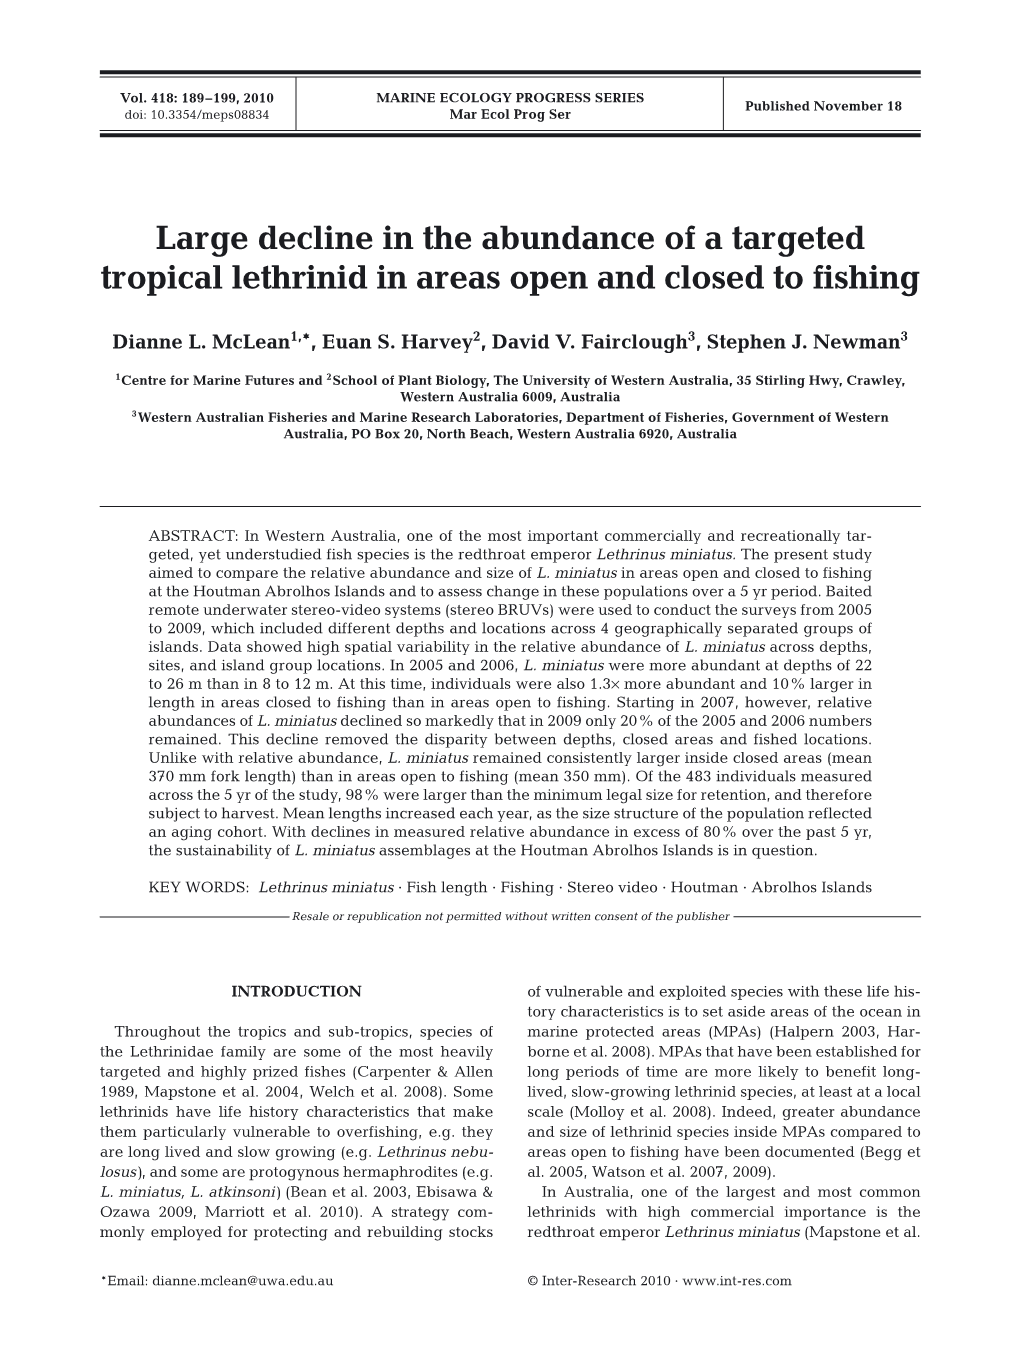 Large Decline in the Abundance of a Targeted Tropical Lethrinid in Areas Open and Closed to Fishing